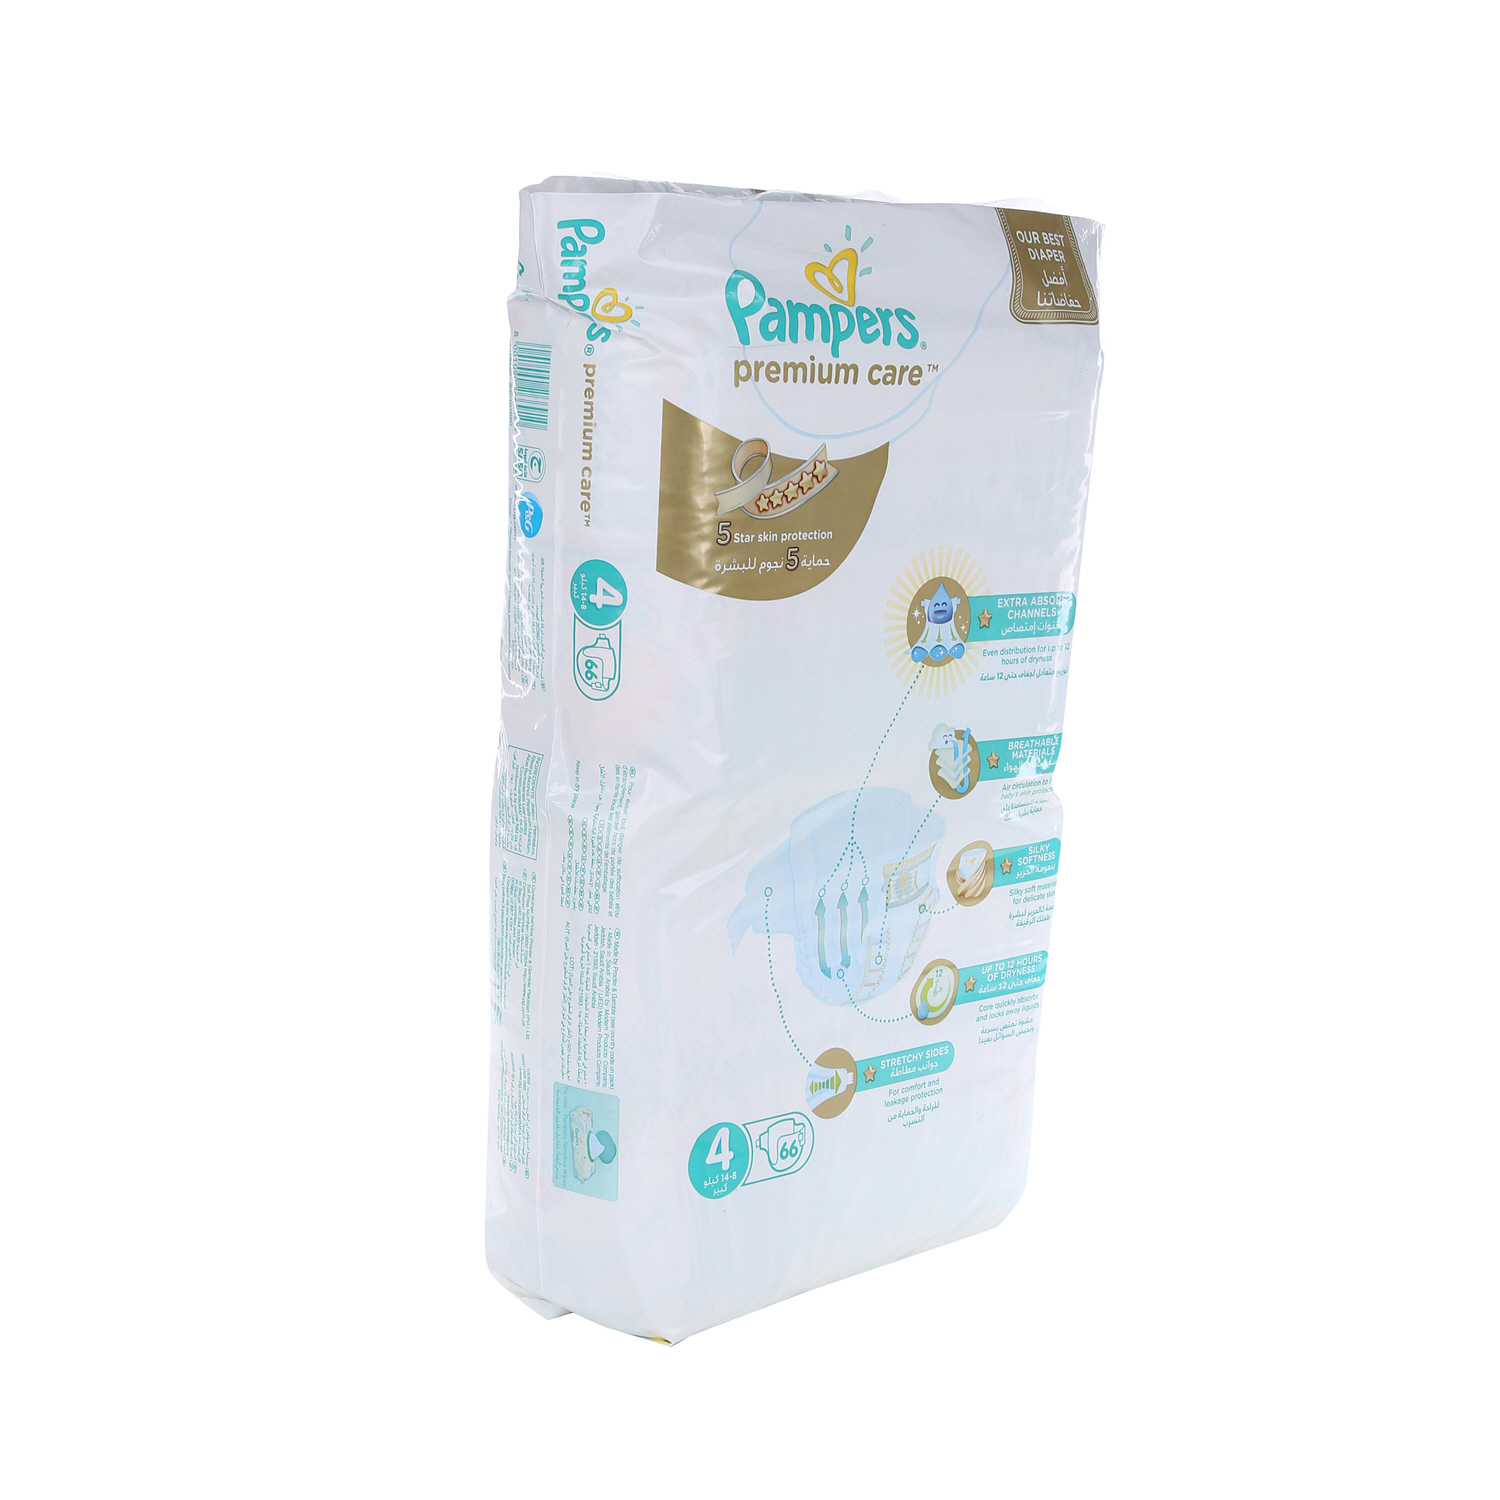 Pampers Premium Care Size 4 Japanese Pack 66 Pieces